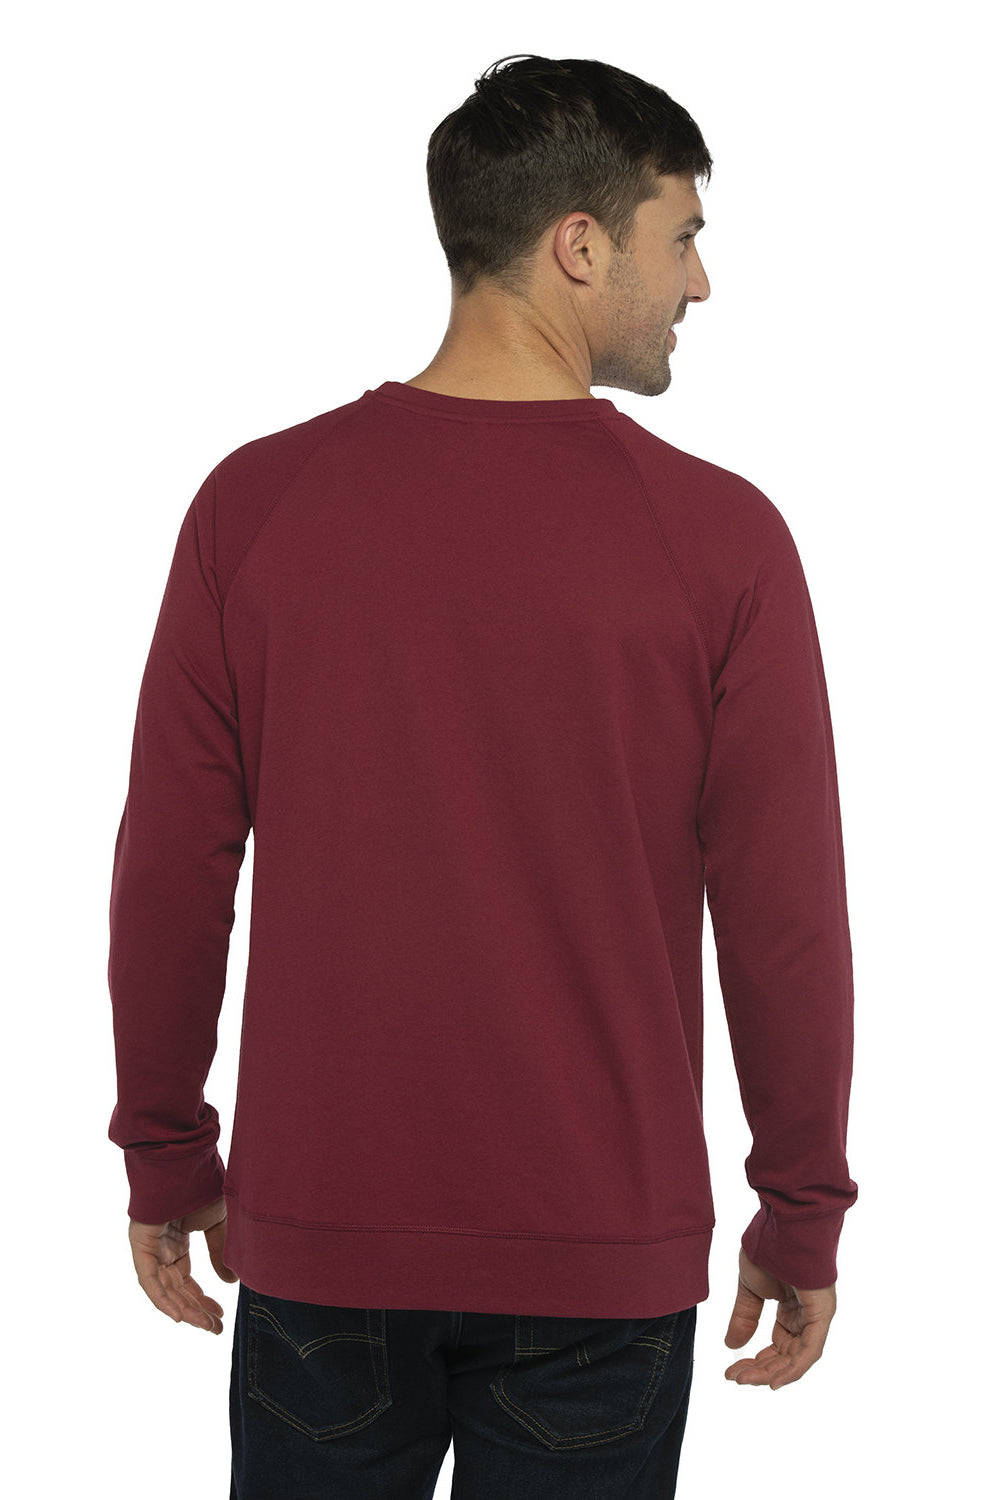 Next Level N9000/9000 Mens French Terry Long Sleeve Crewneck T-Shirt Cardinal Red Back